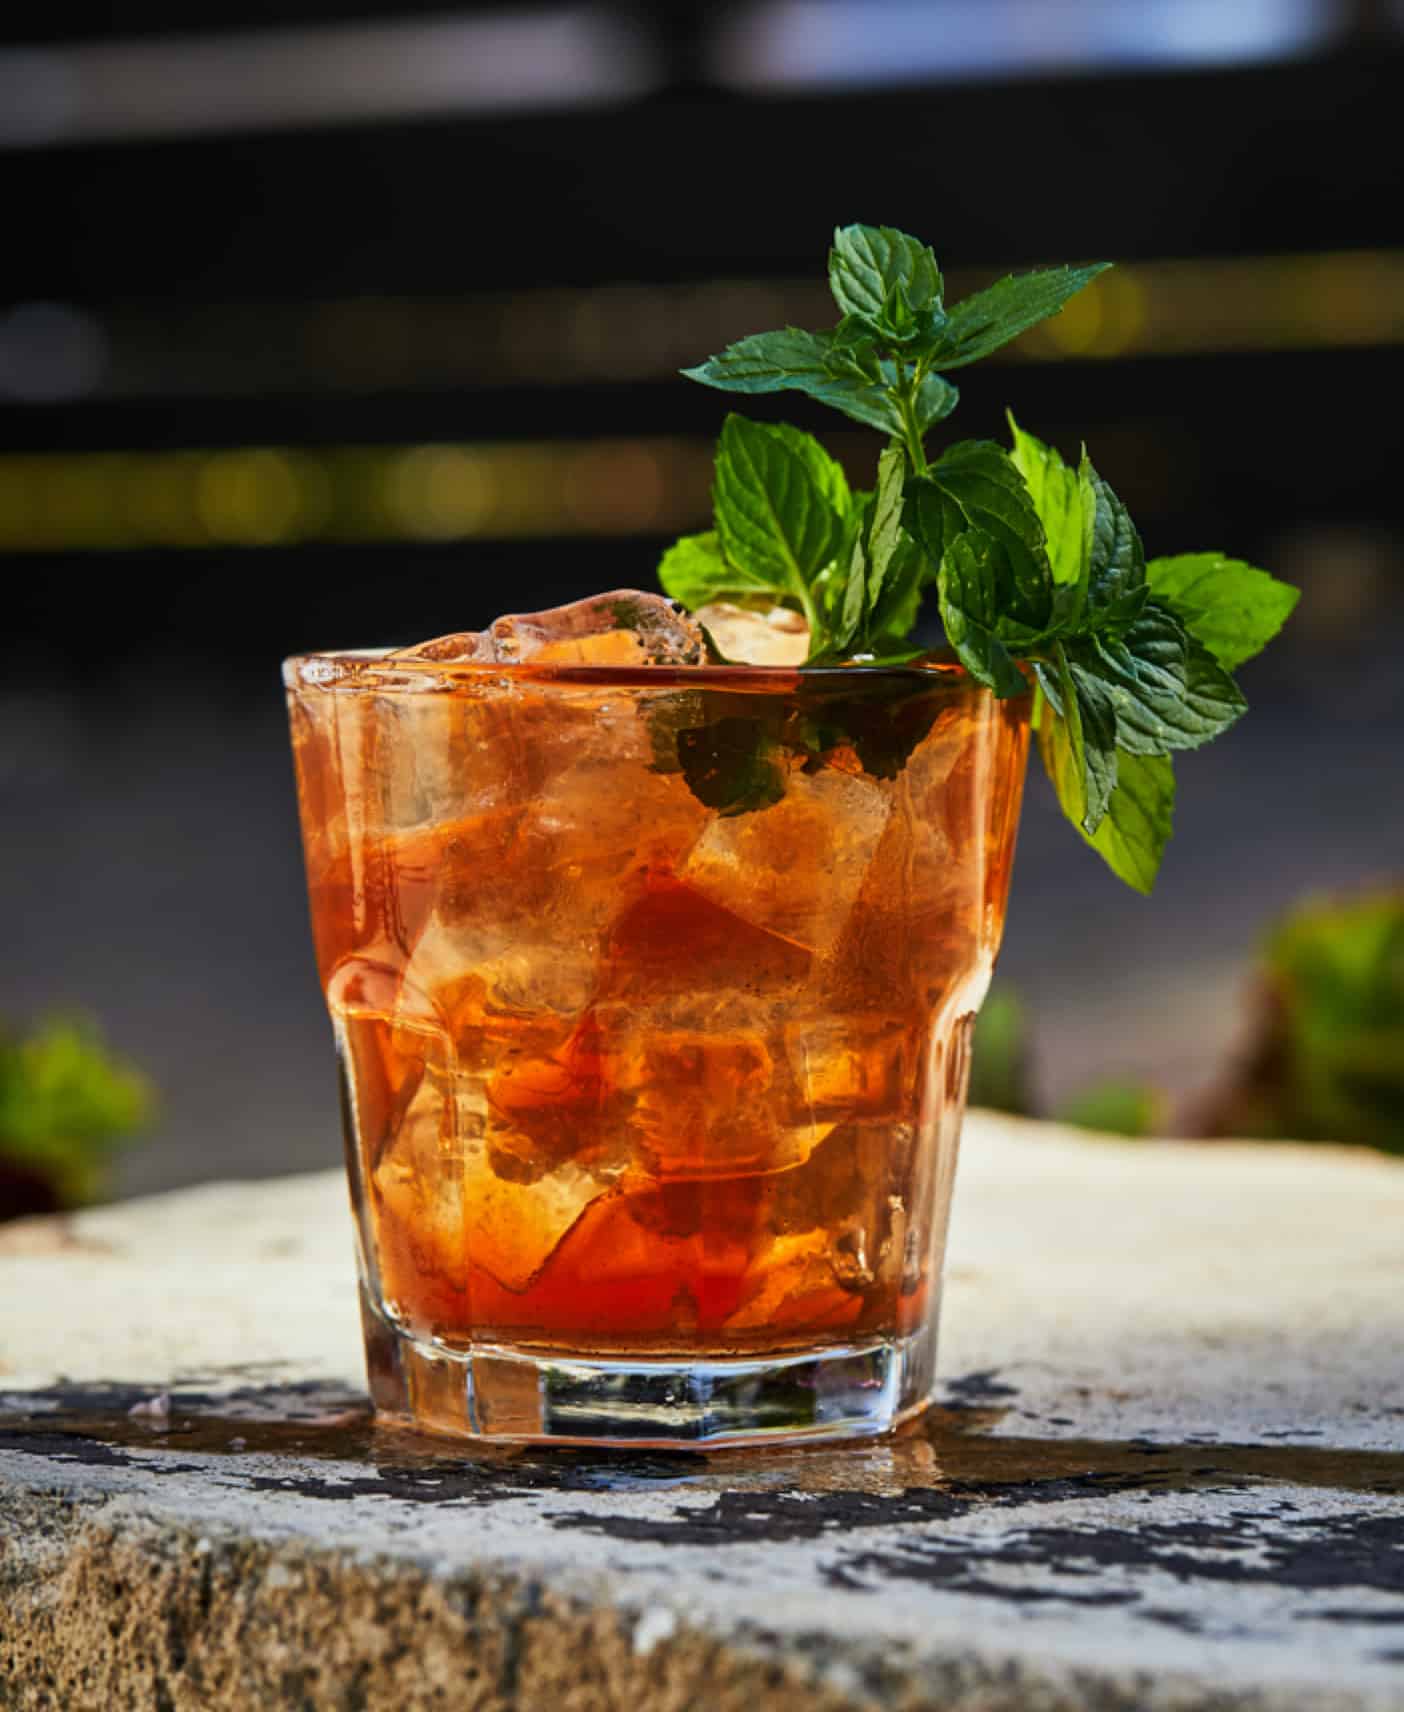 Mint Julep Whiskey Cocktail made with Pendleton Original Whisky